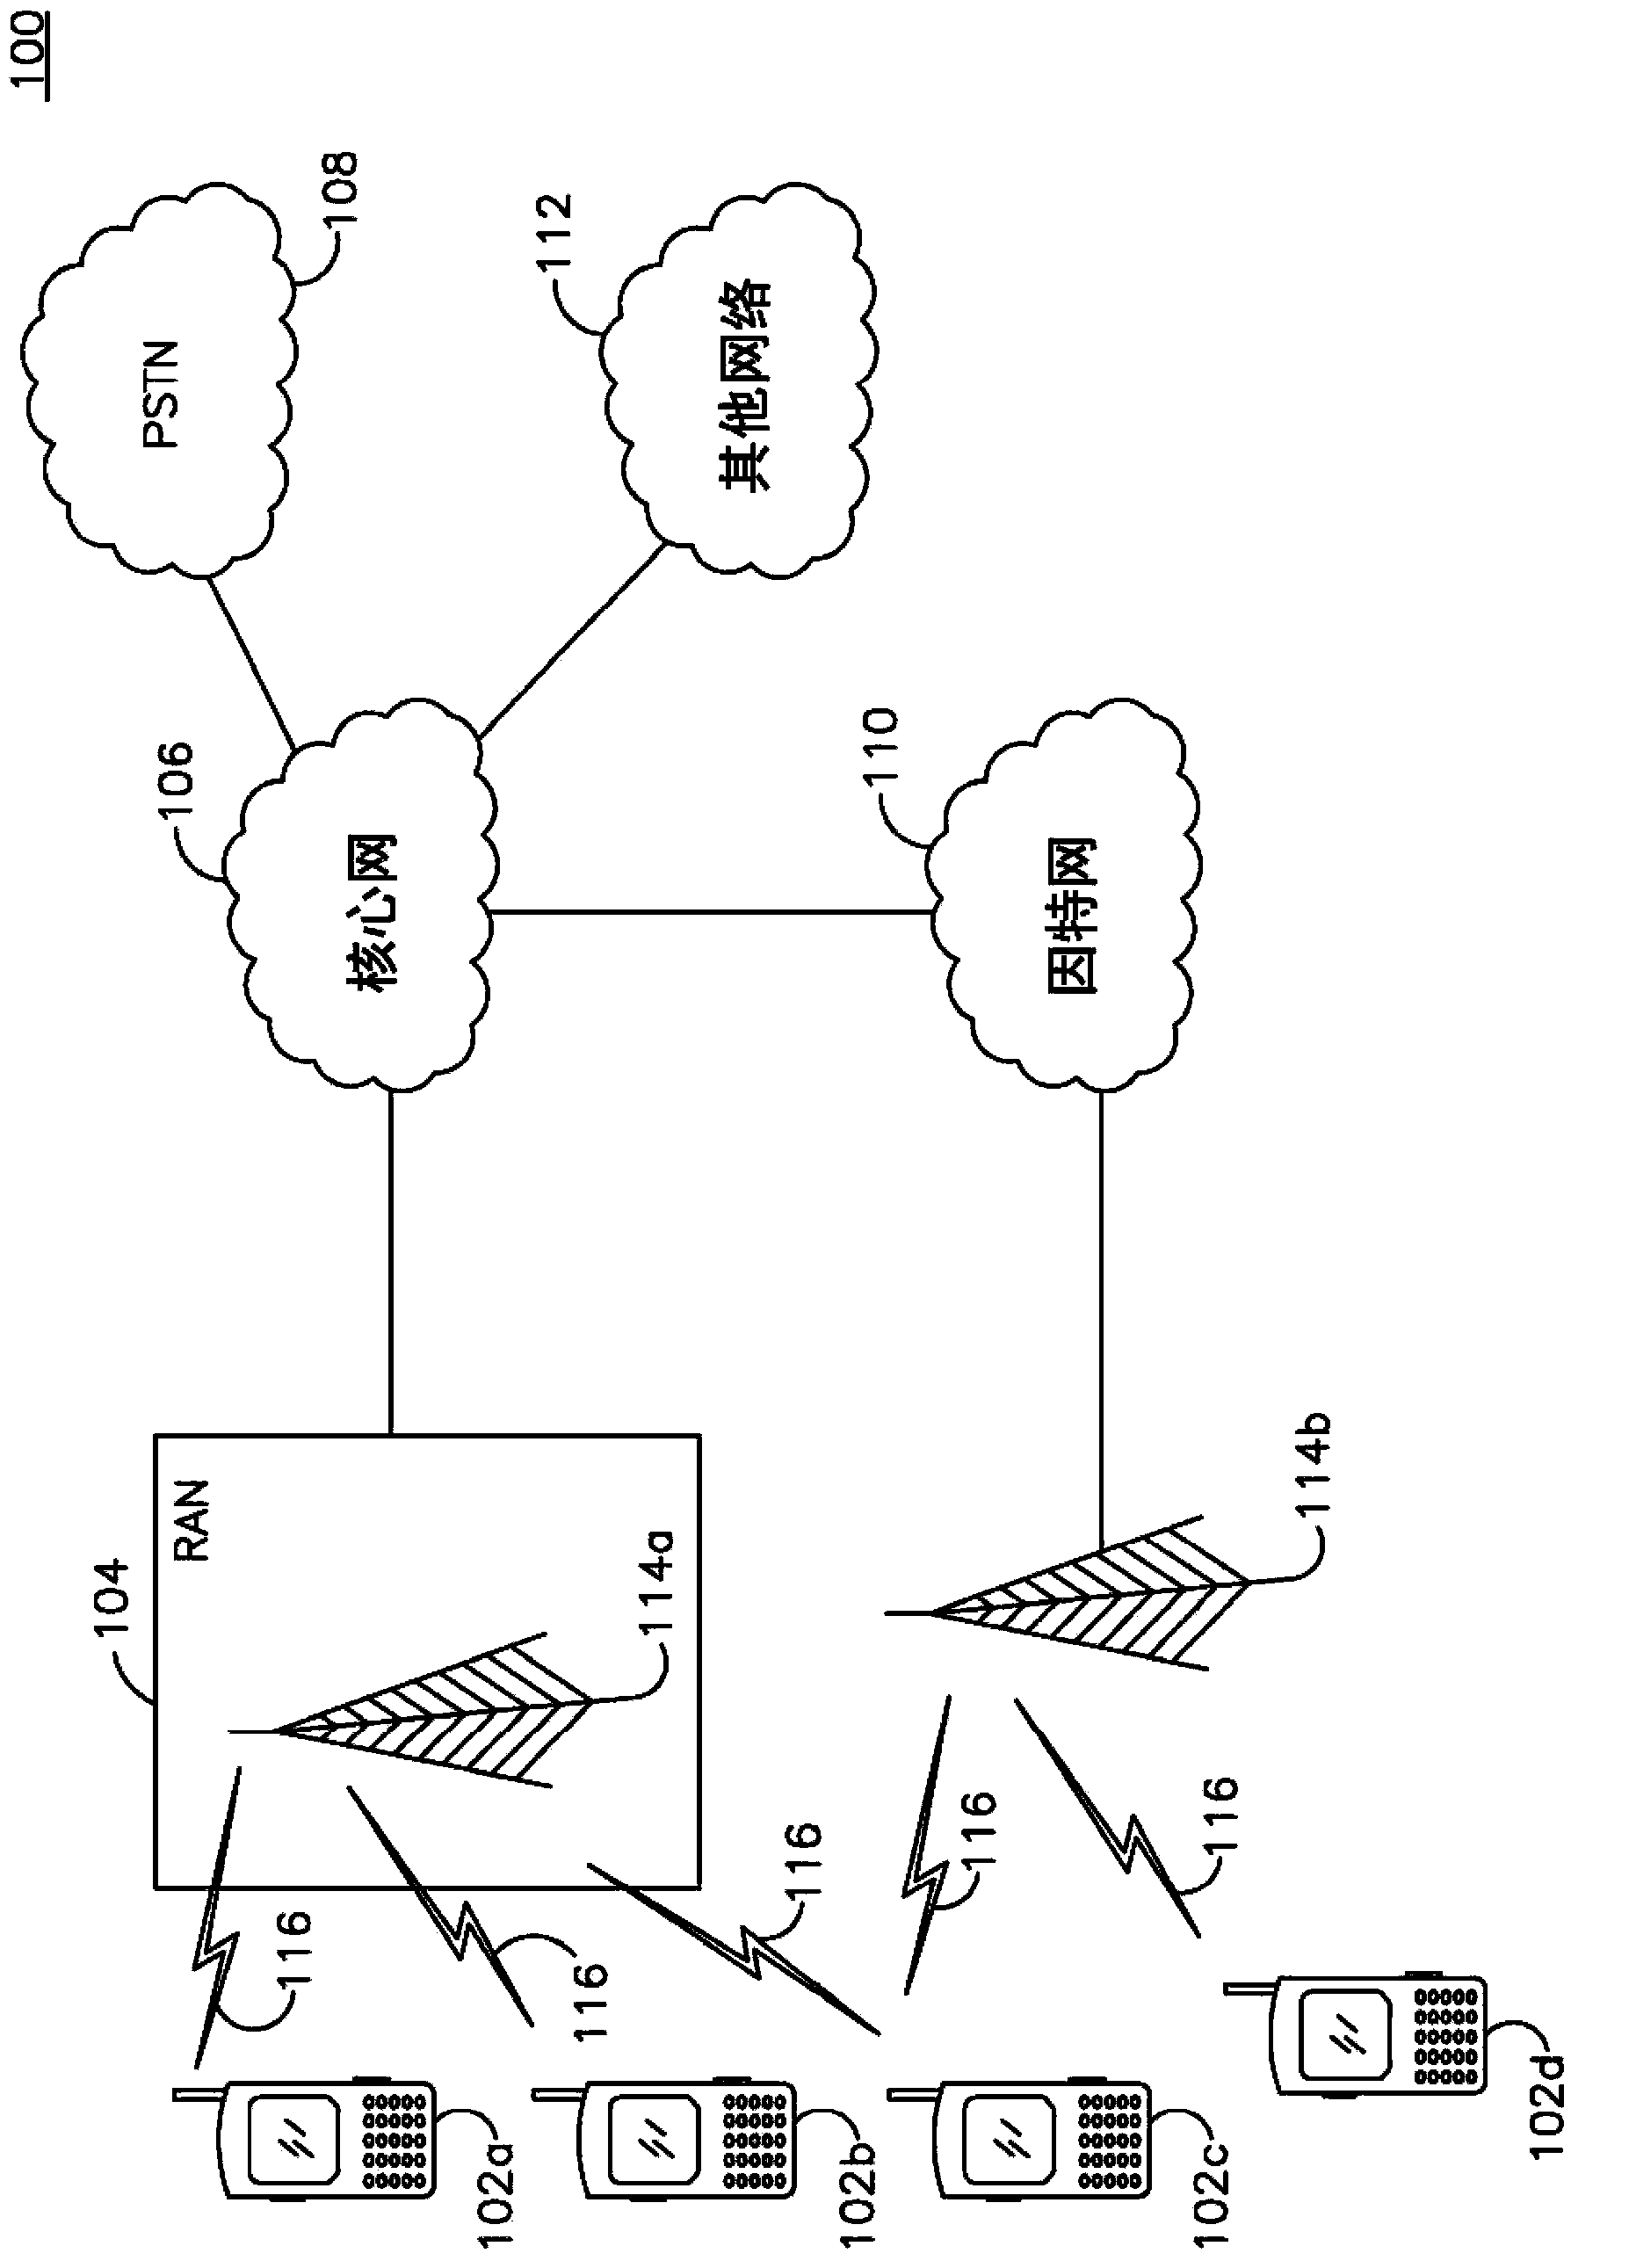 Method and apparatus for operating supplementary cells in licensed exempt spectrum